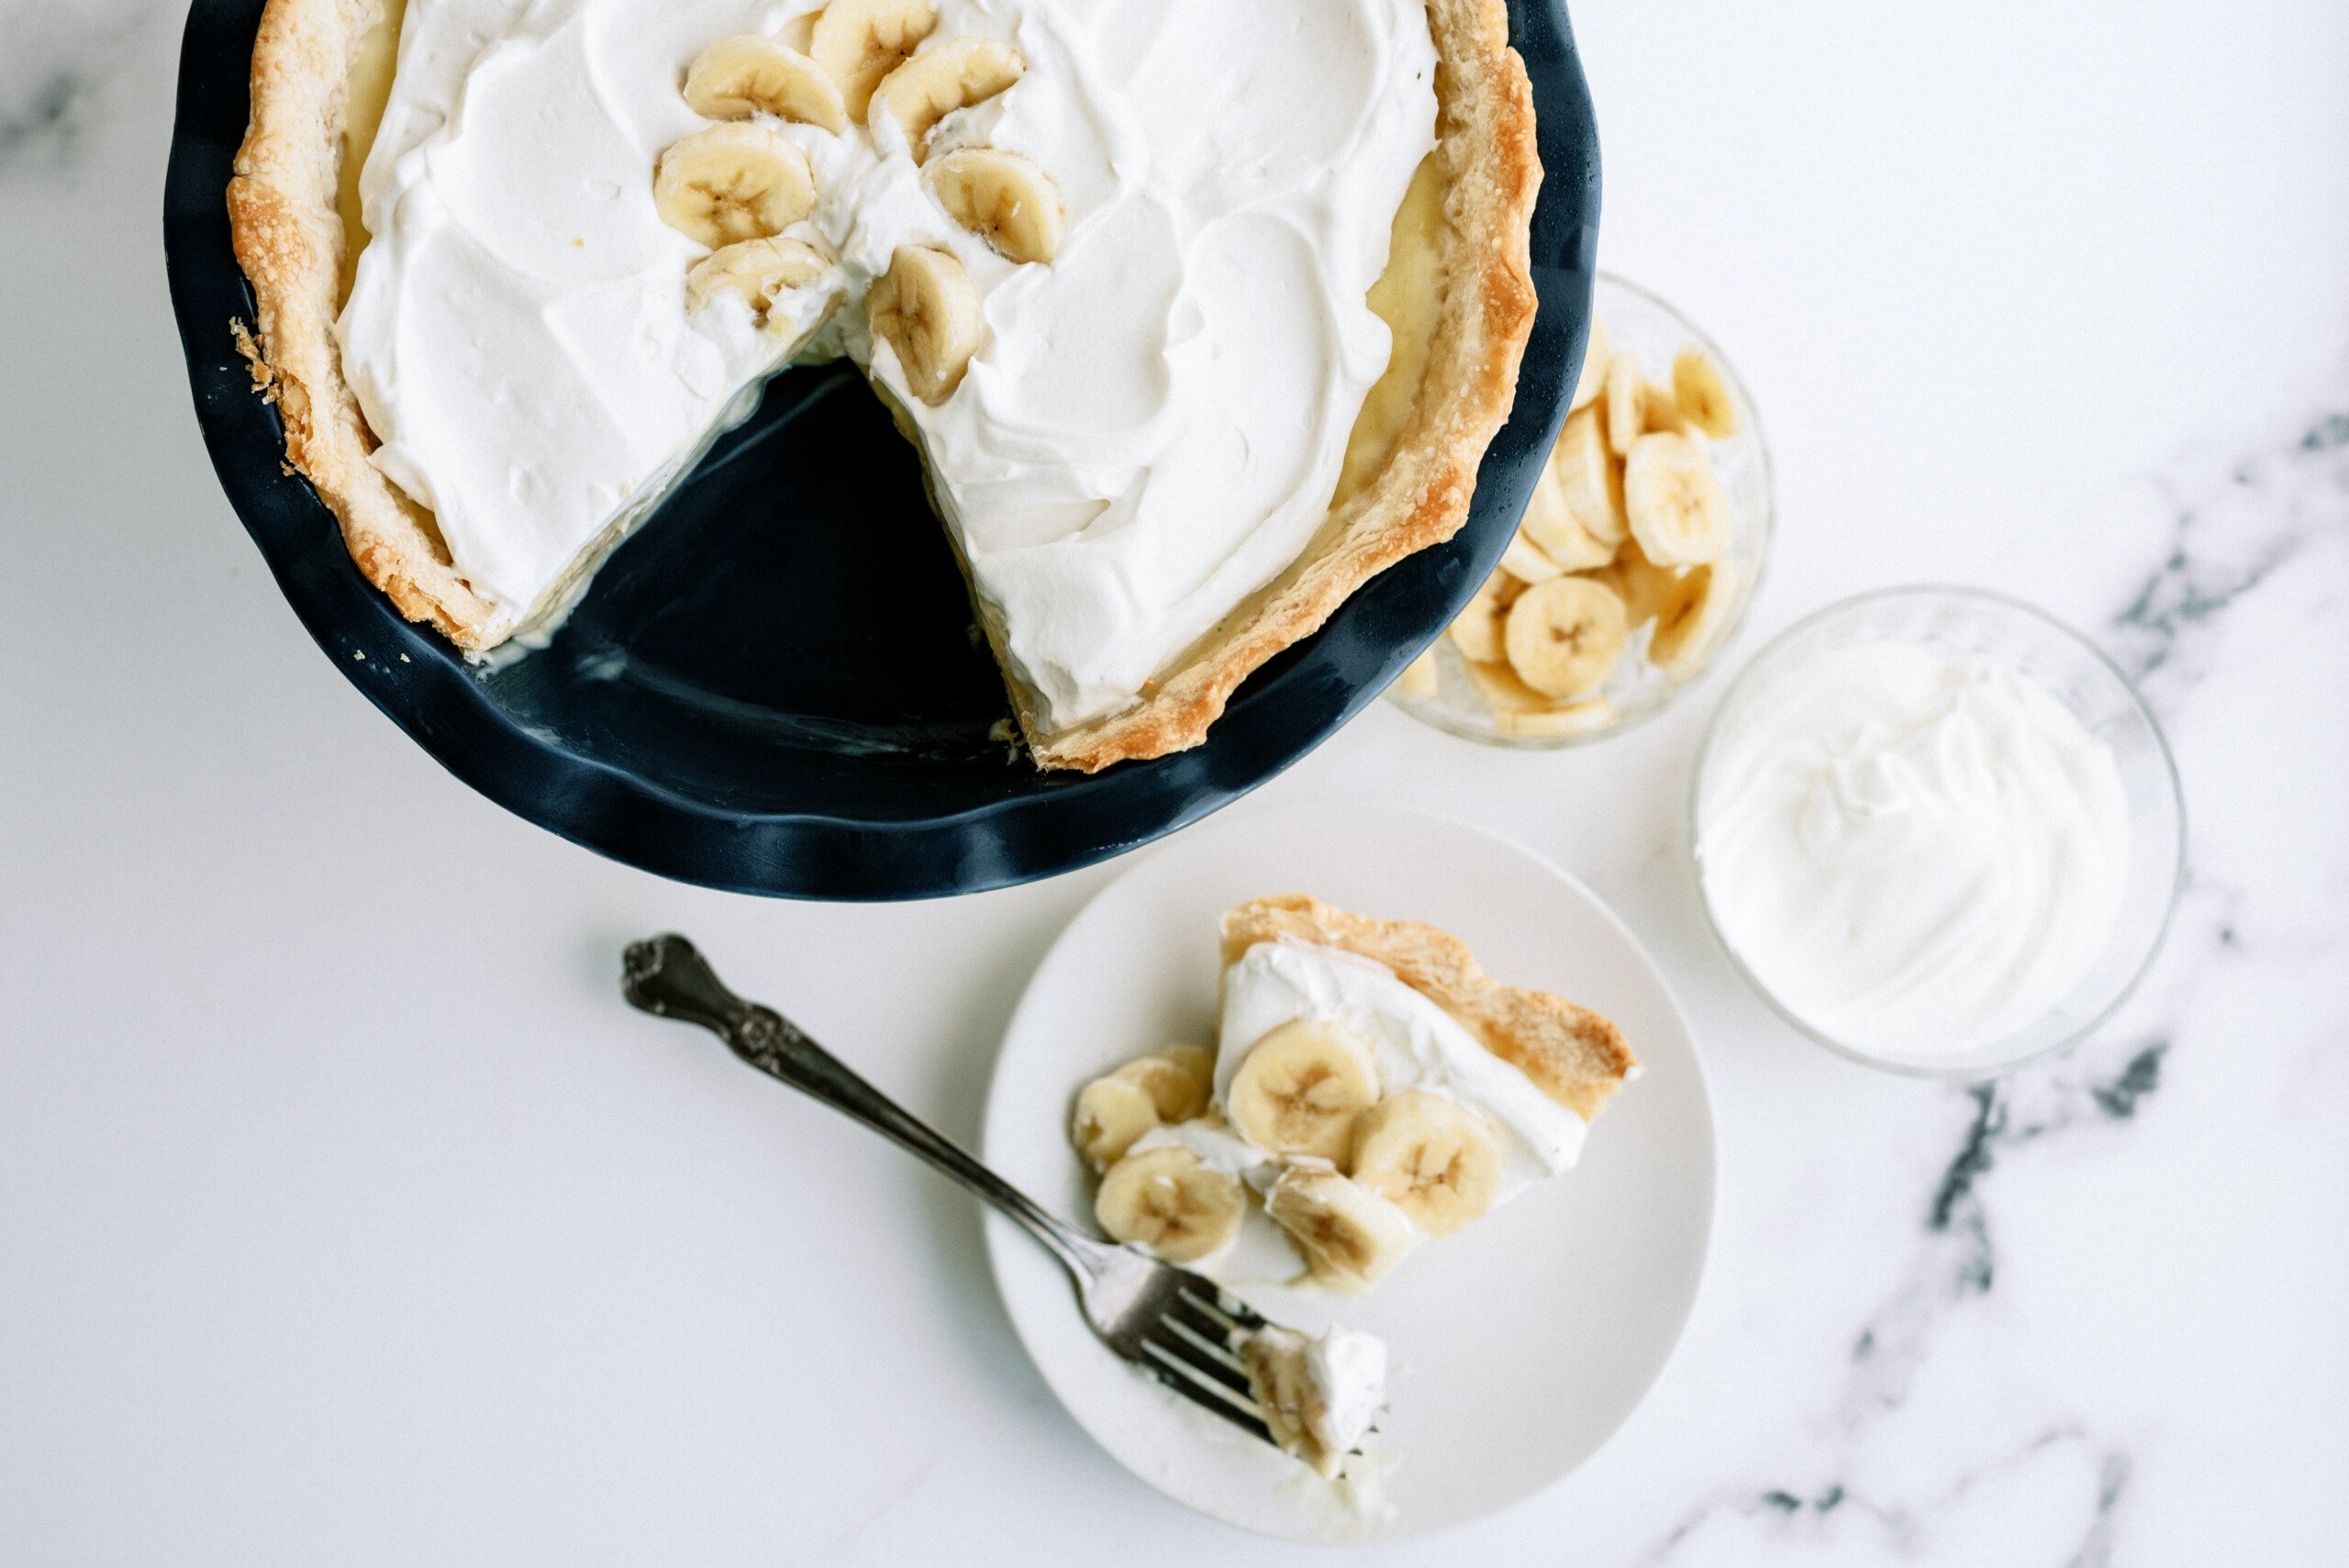 banana cream pie with a slice taken out of it. the slice is on a white plate next to the whole pie